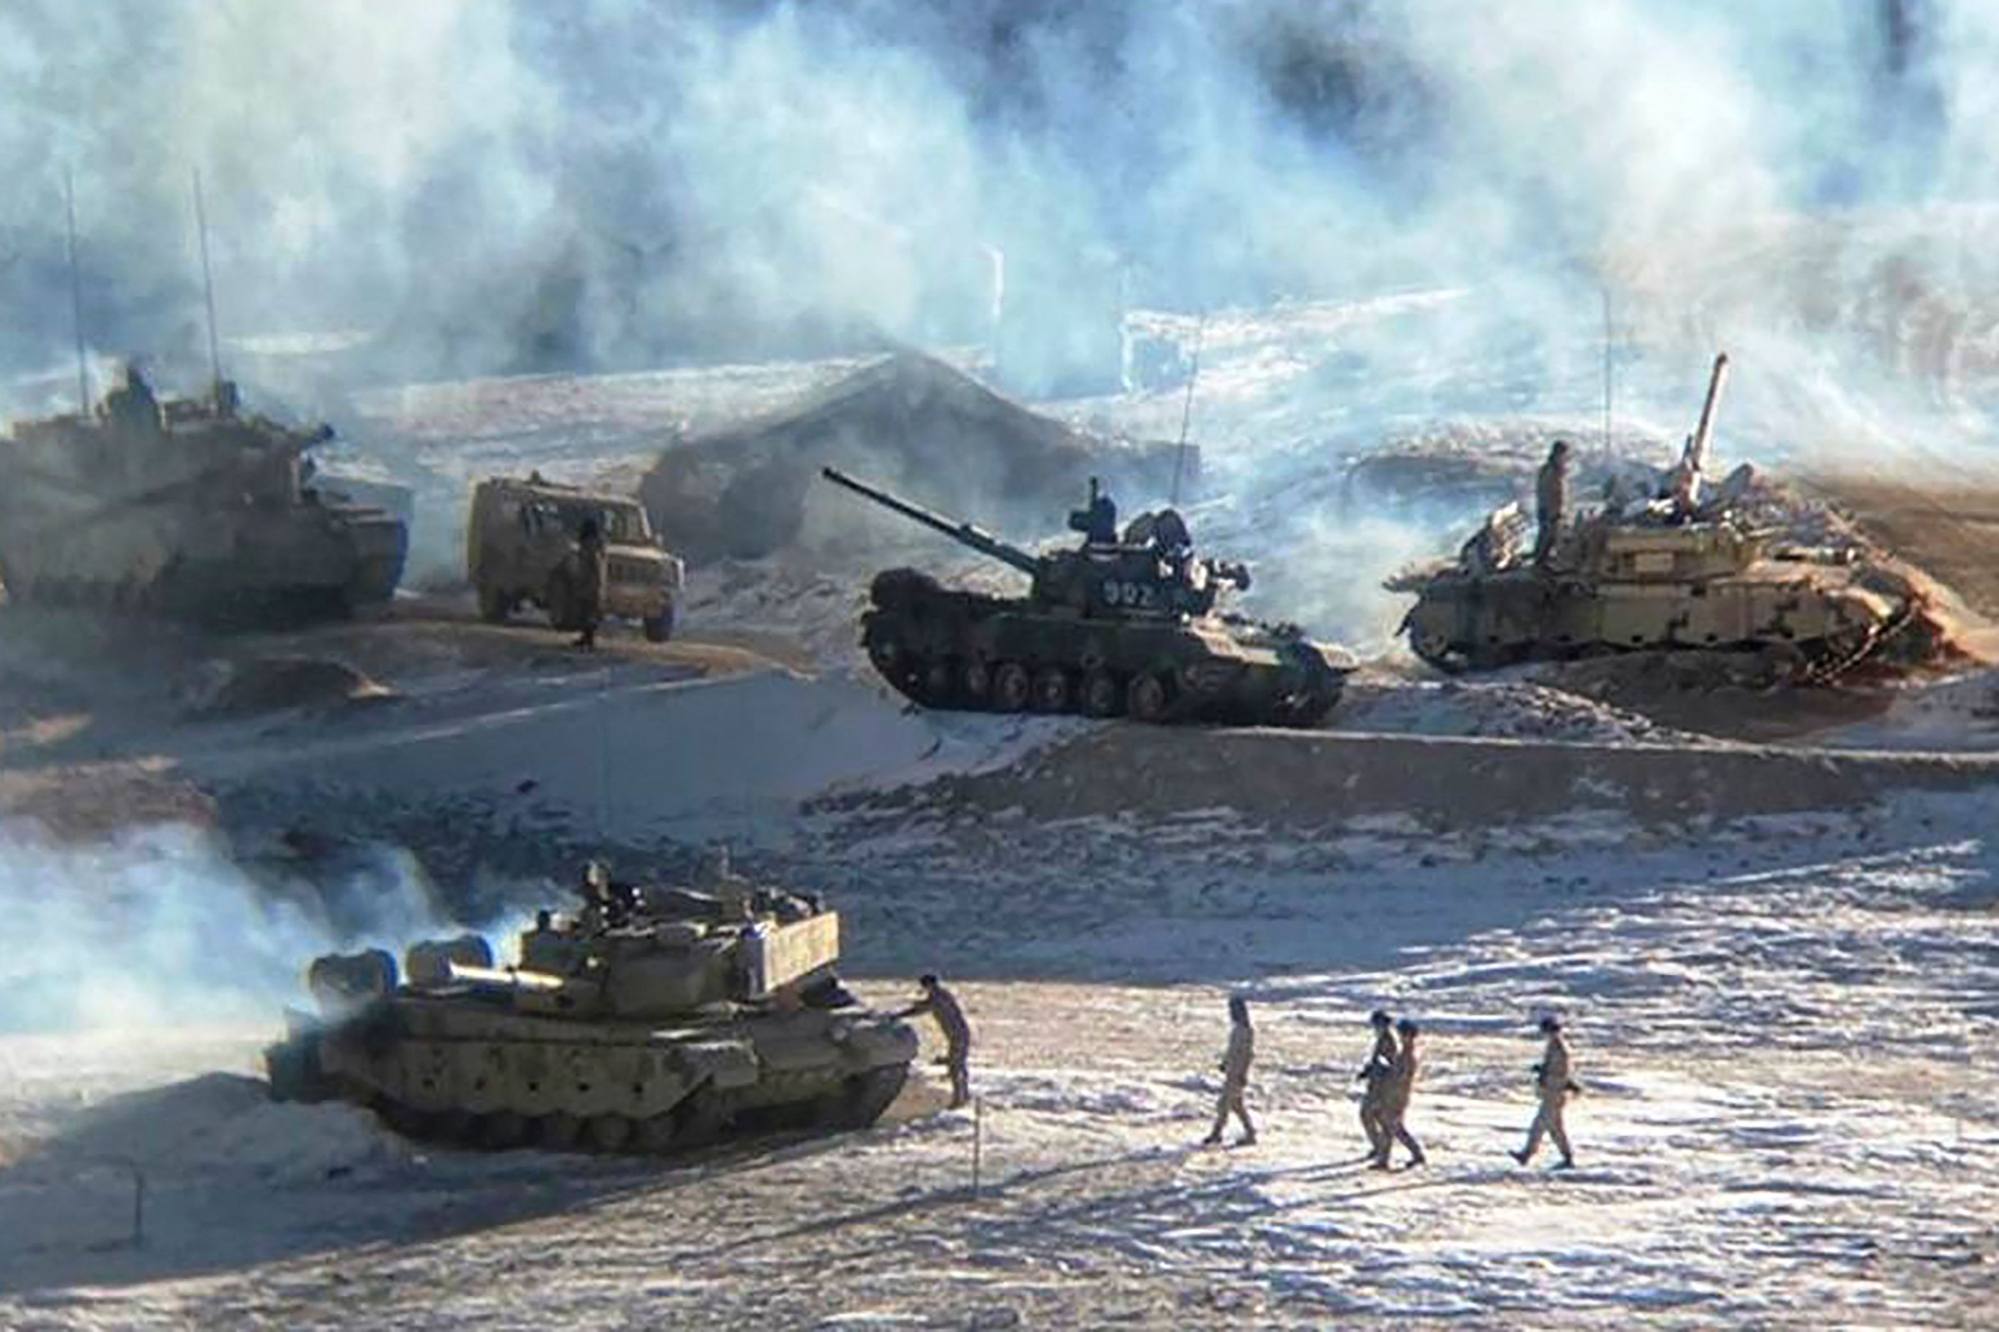 People Liberation Army (PLA) soldiers and tanks during military disengagement along the Line of Actual Control (LAC) at the India-China border in Ladakh. Photo: AFP